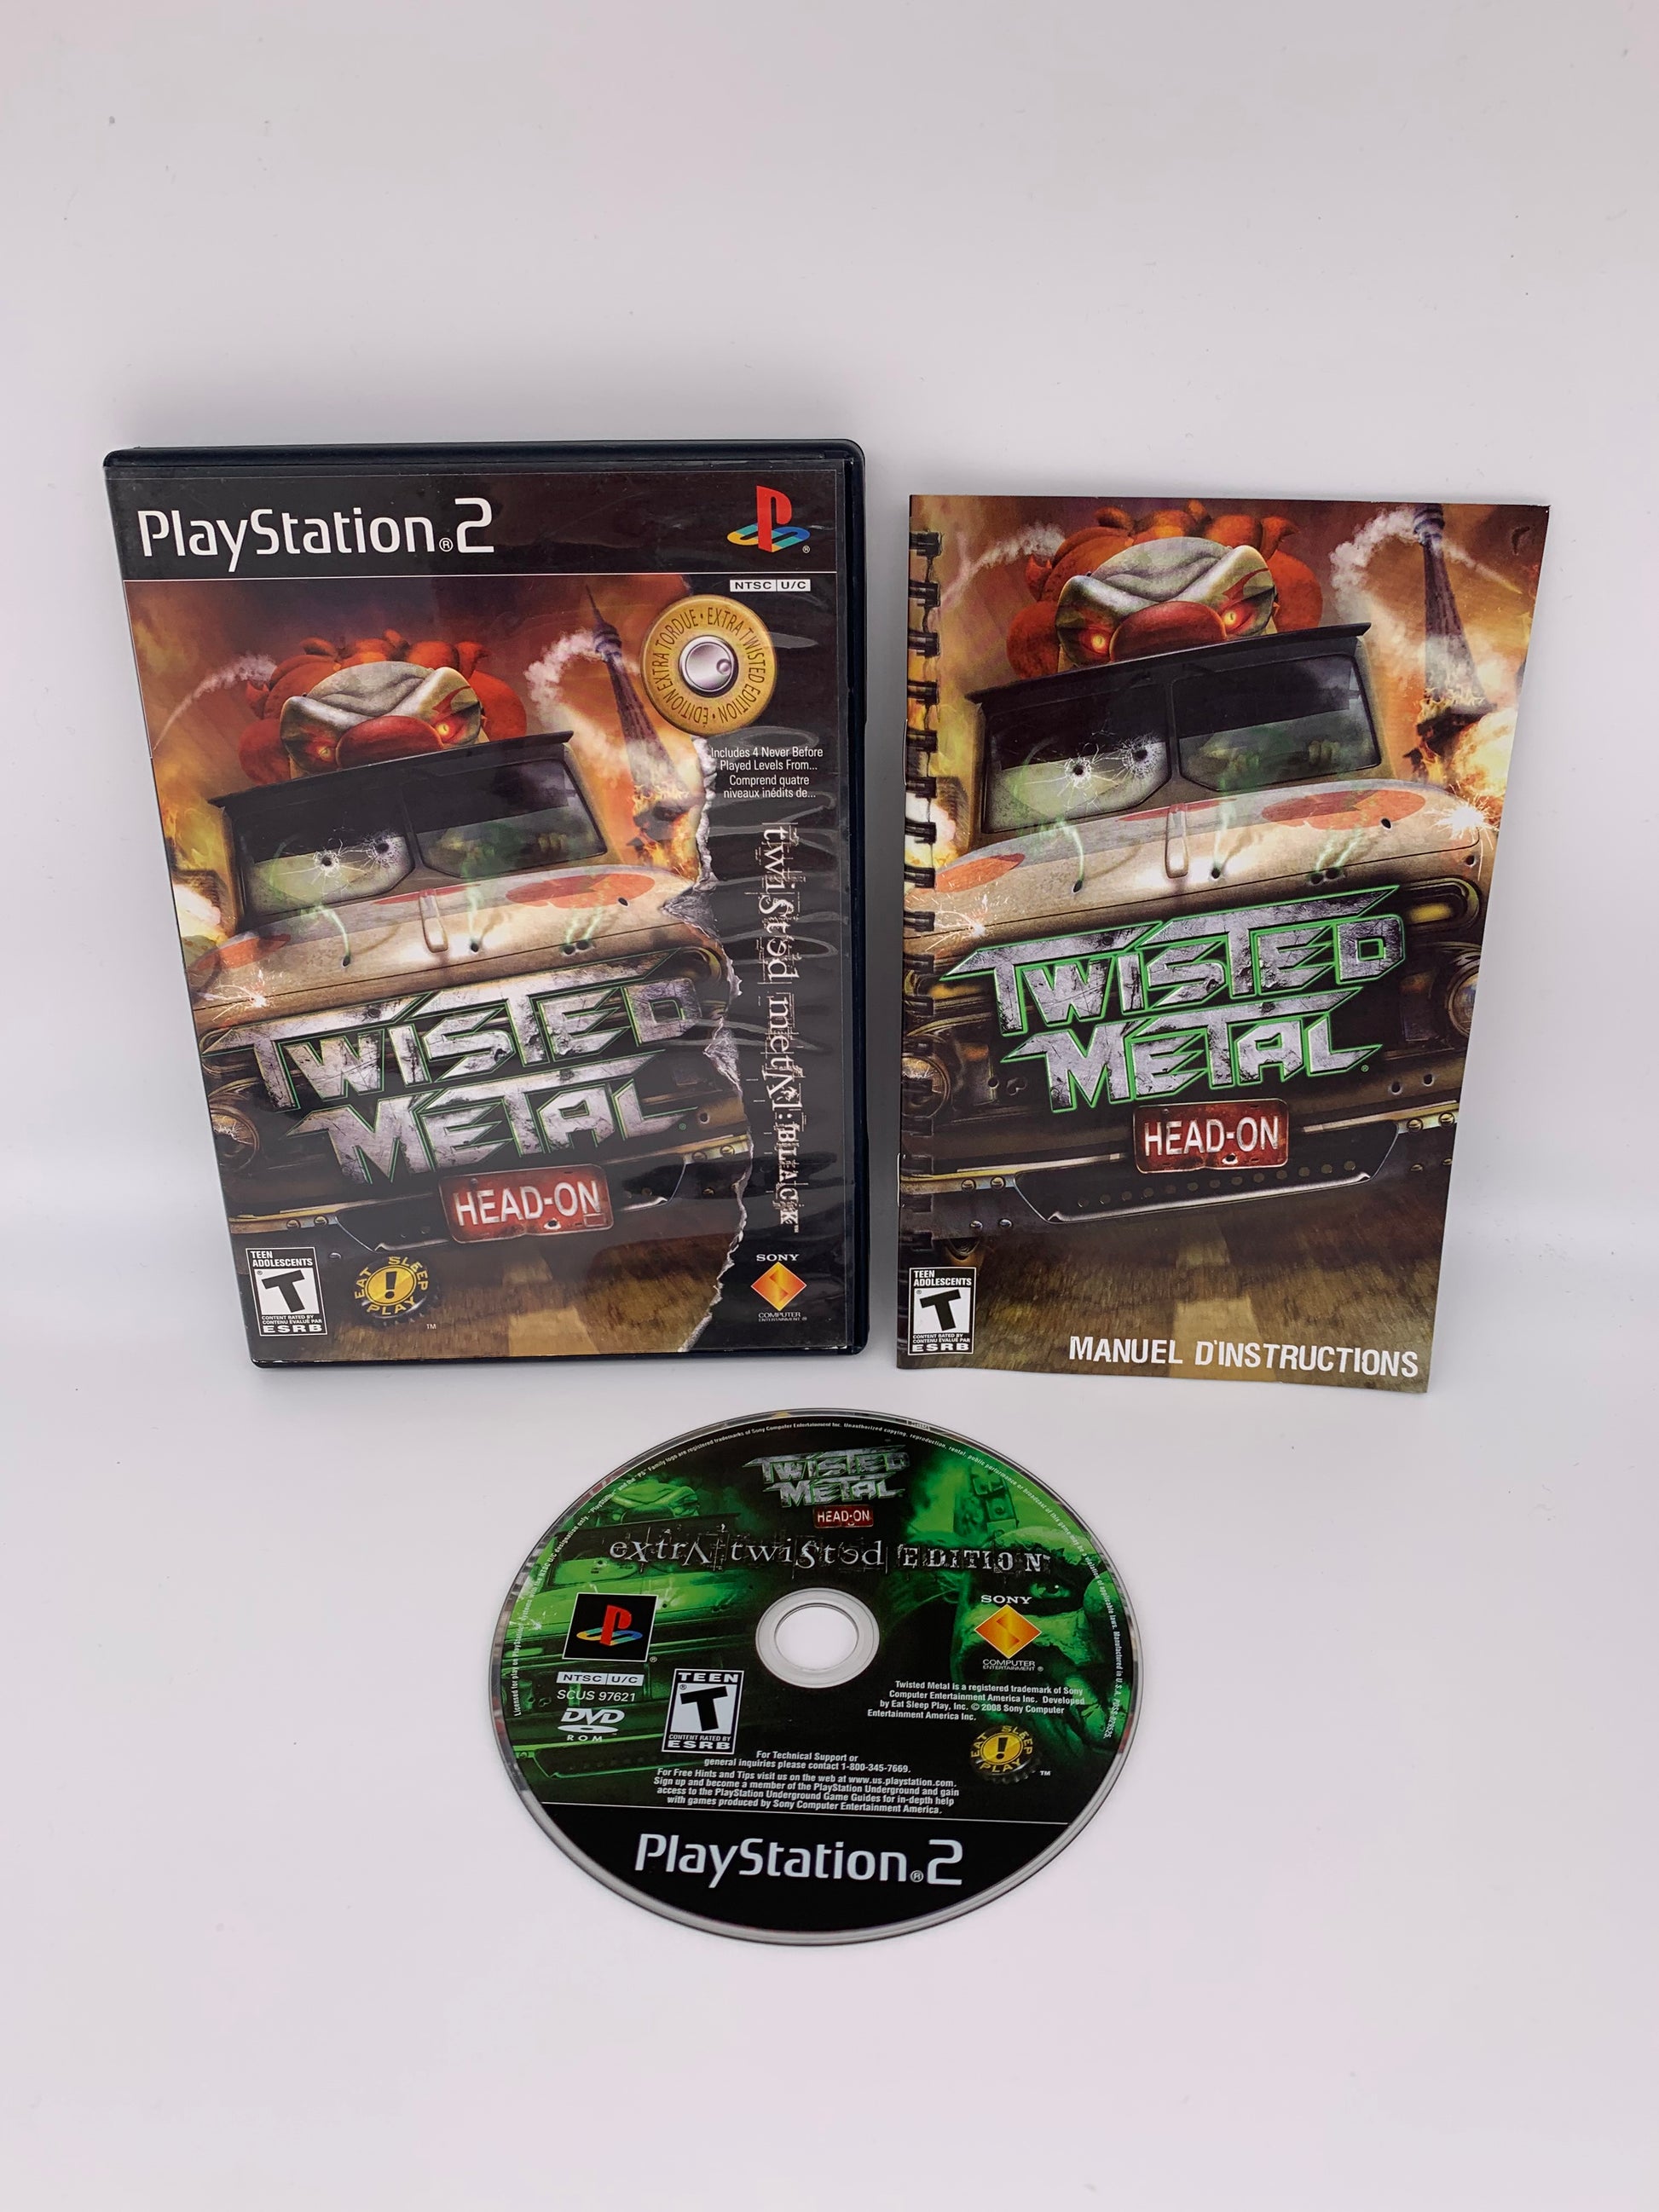 PiXEL-RETRO.COM : SONY PLAYSTATION 2 (PS2) GAME NTSC TWISTED METAL HEAD-ON EXTRA TWISTED EDITION